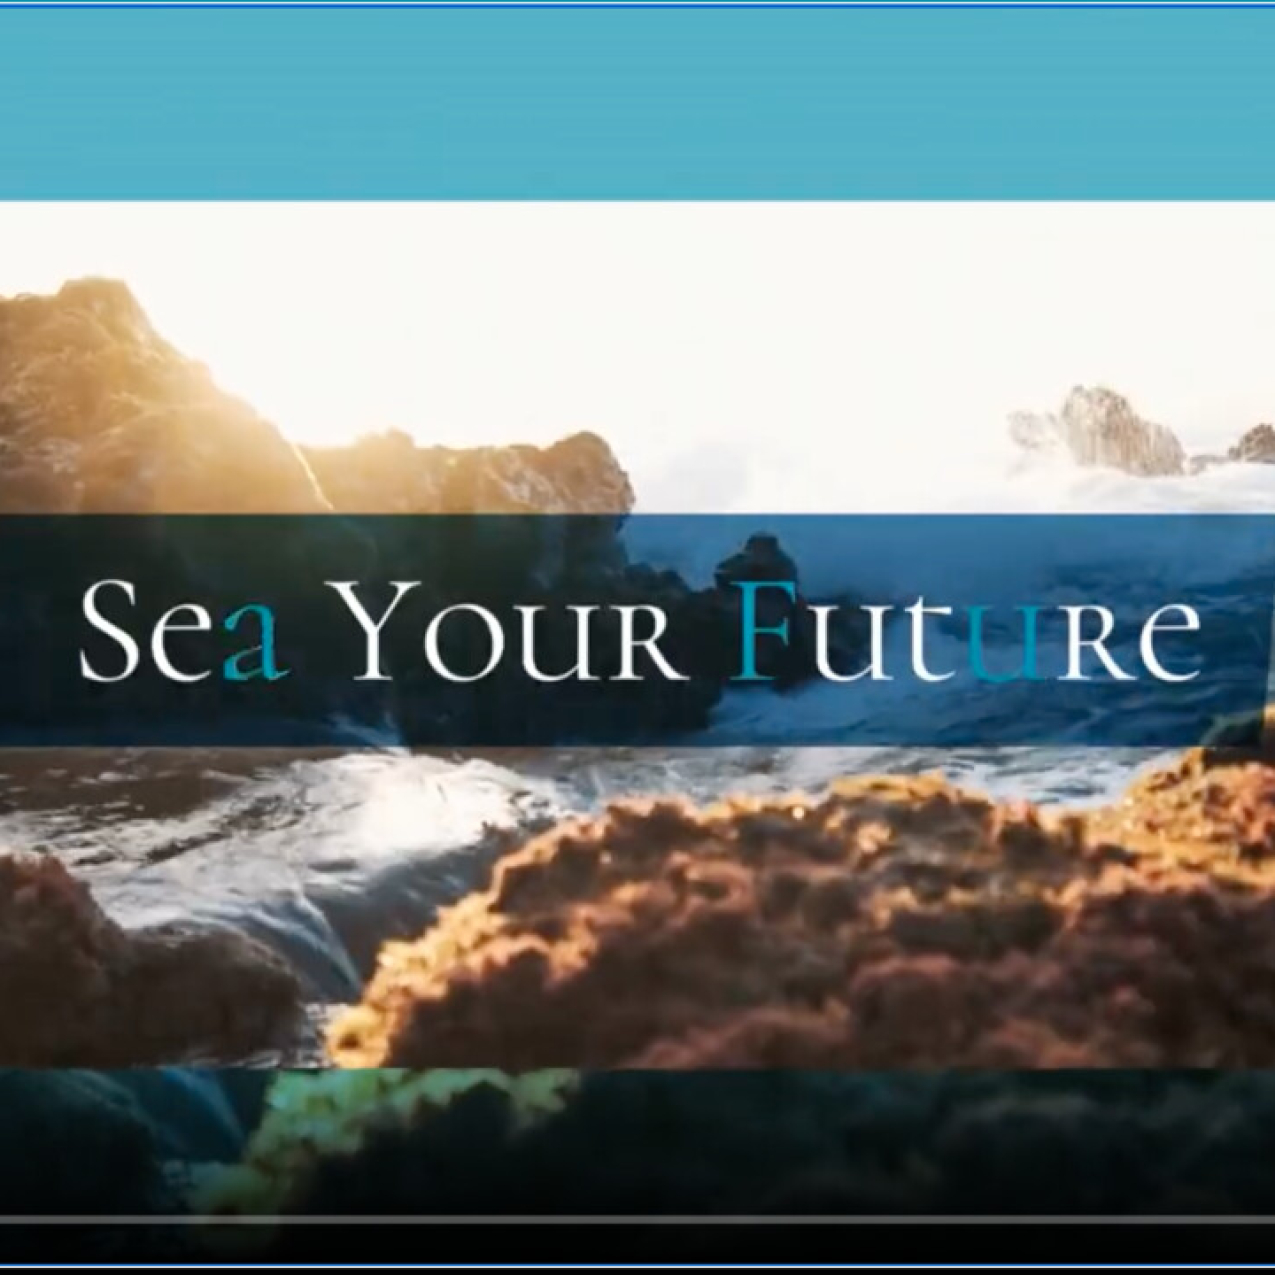 A screenshot of a video clip with a rocky intertidal ocean background. Text: Sea Your Future, with NOAA and NOAA Sanctuaries logos in the bottom right corner of the image.